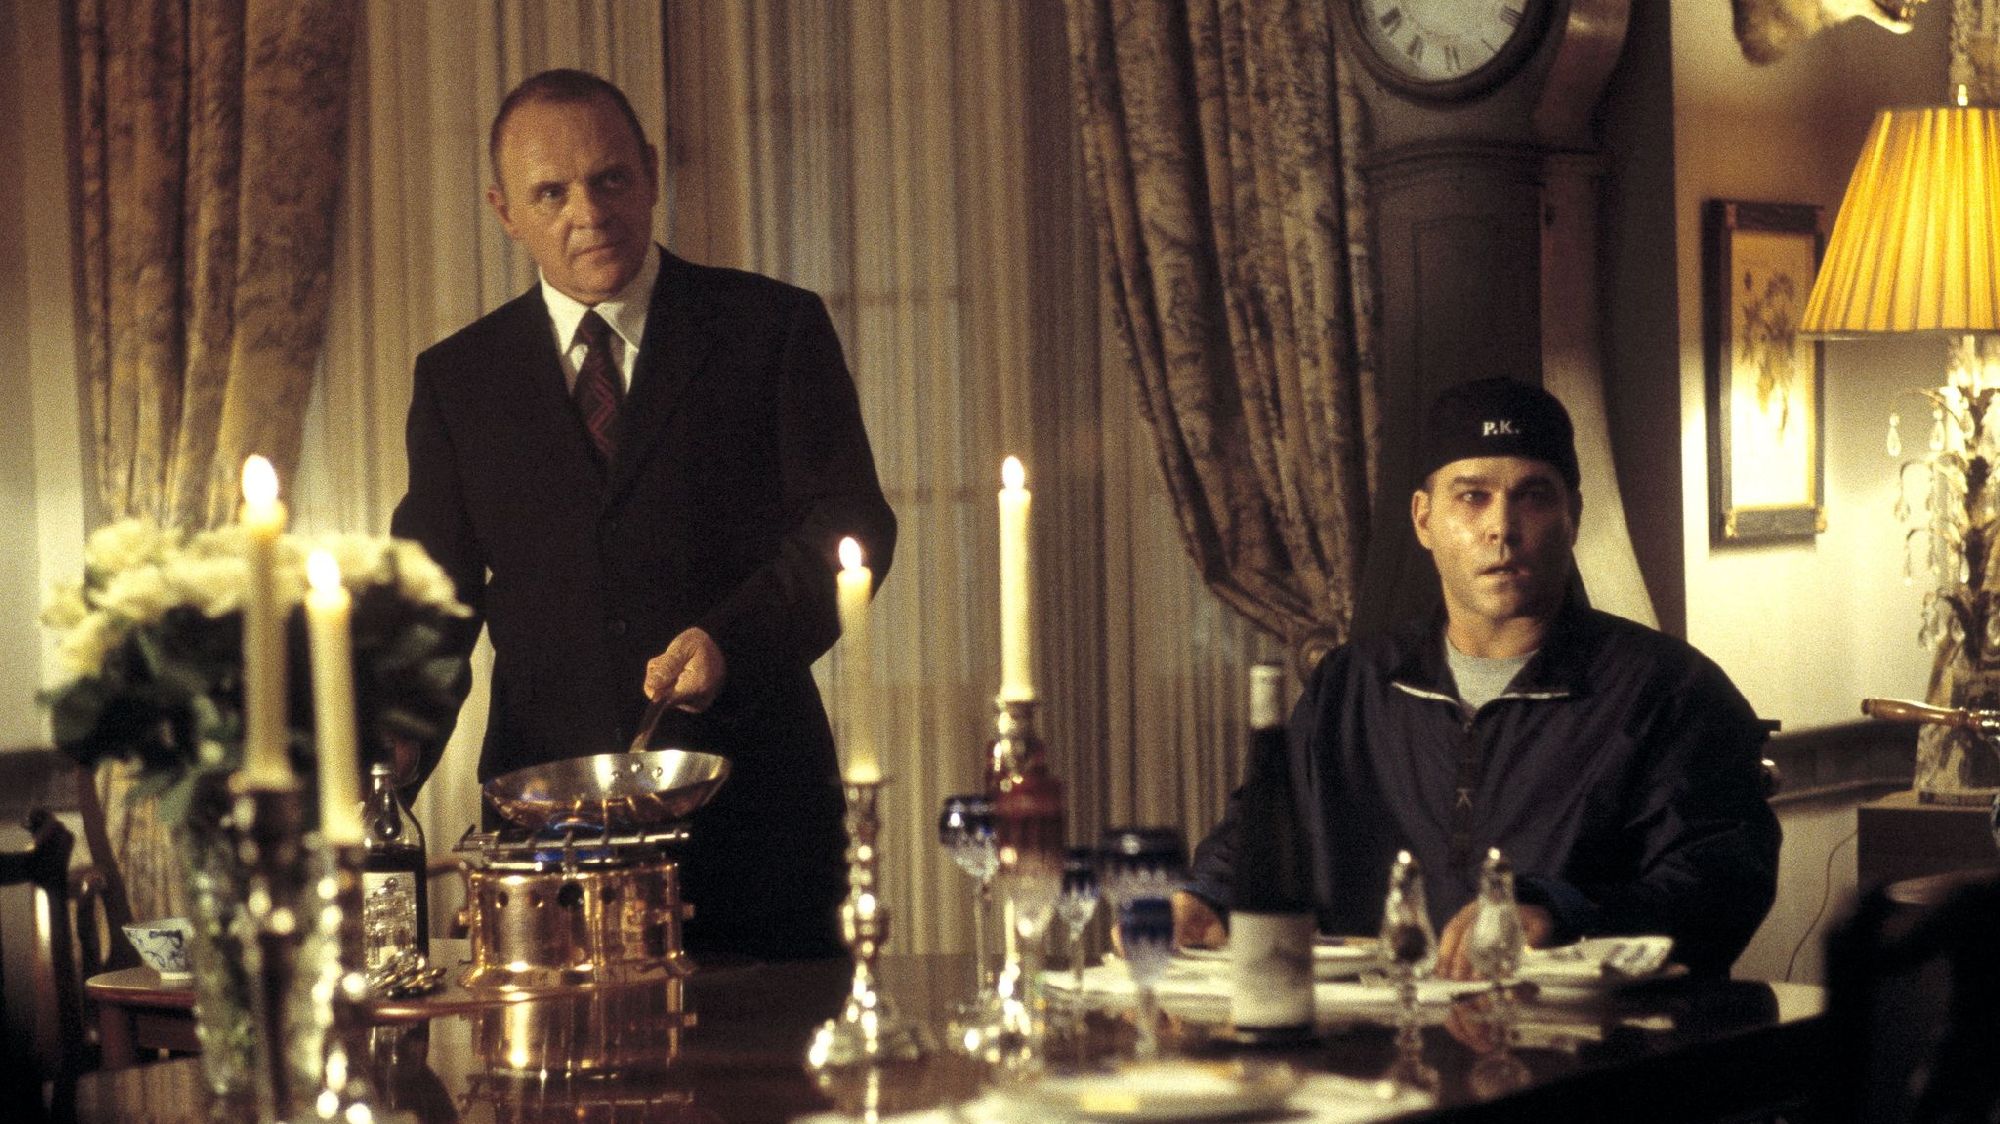 Anthony Hopkins with Liotta in one of the most remembered moments of the film "Hannibal".  (Netflix)